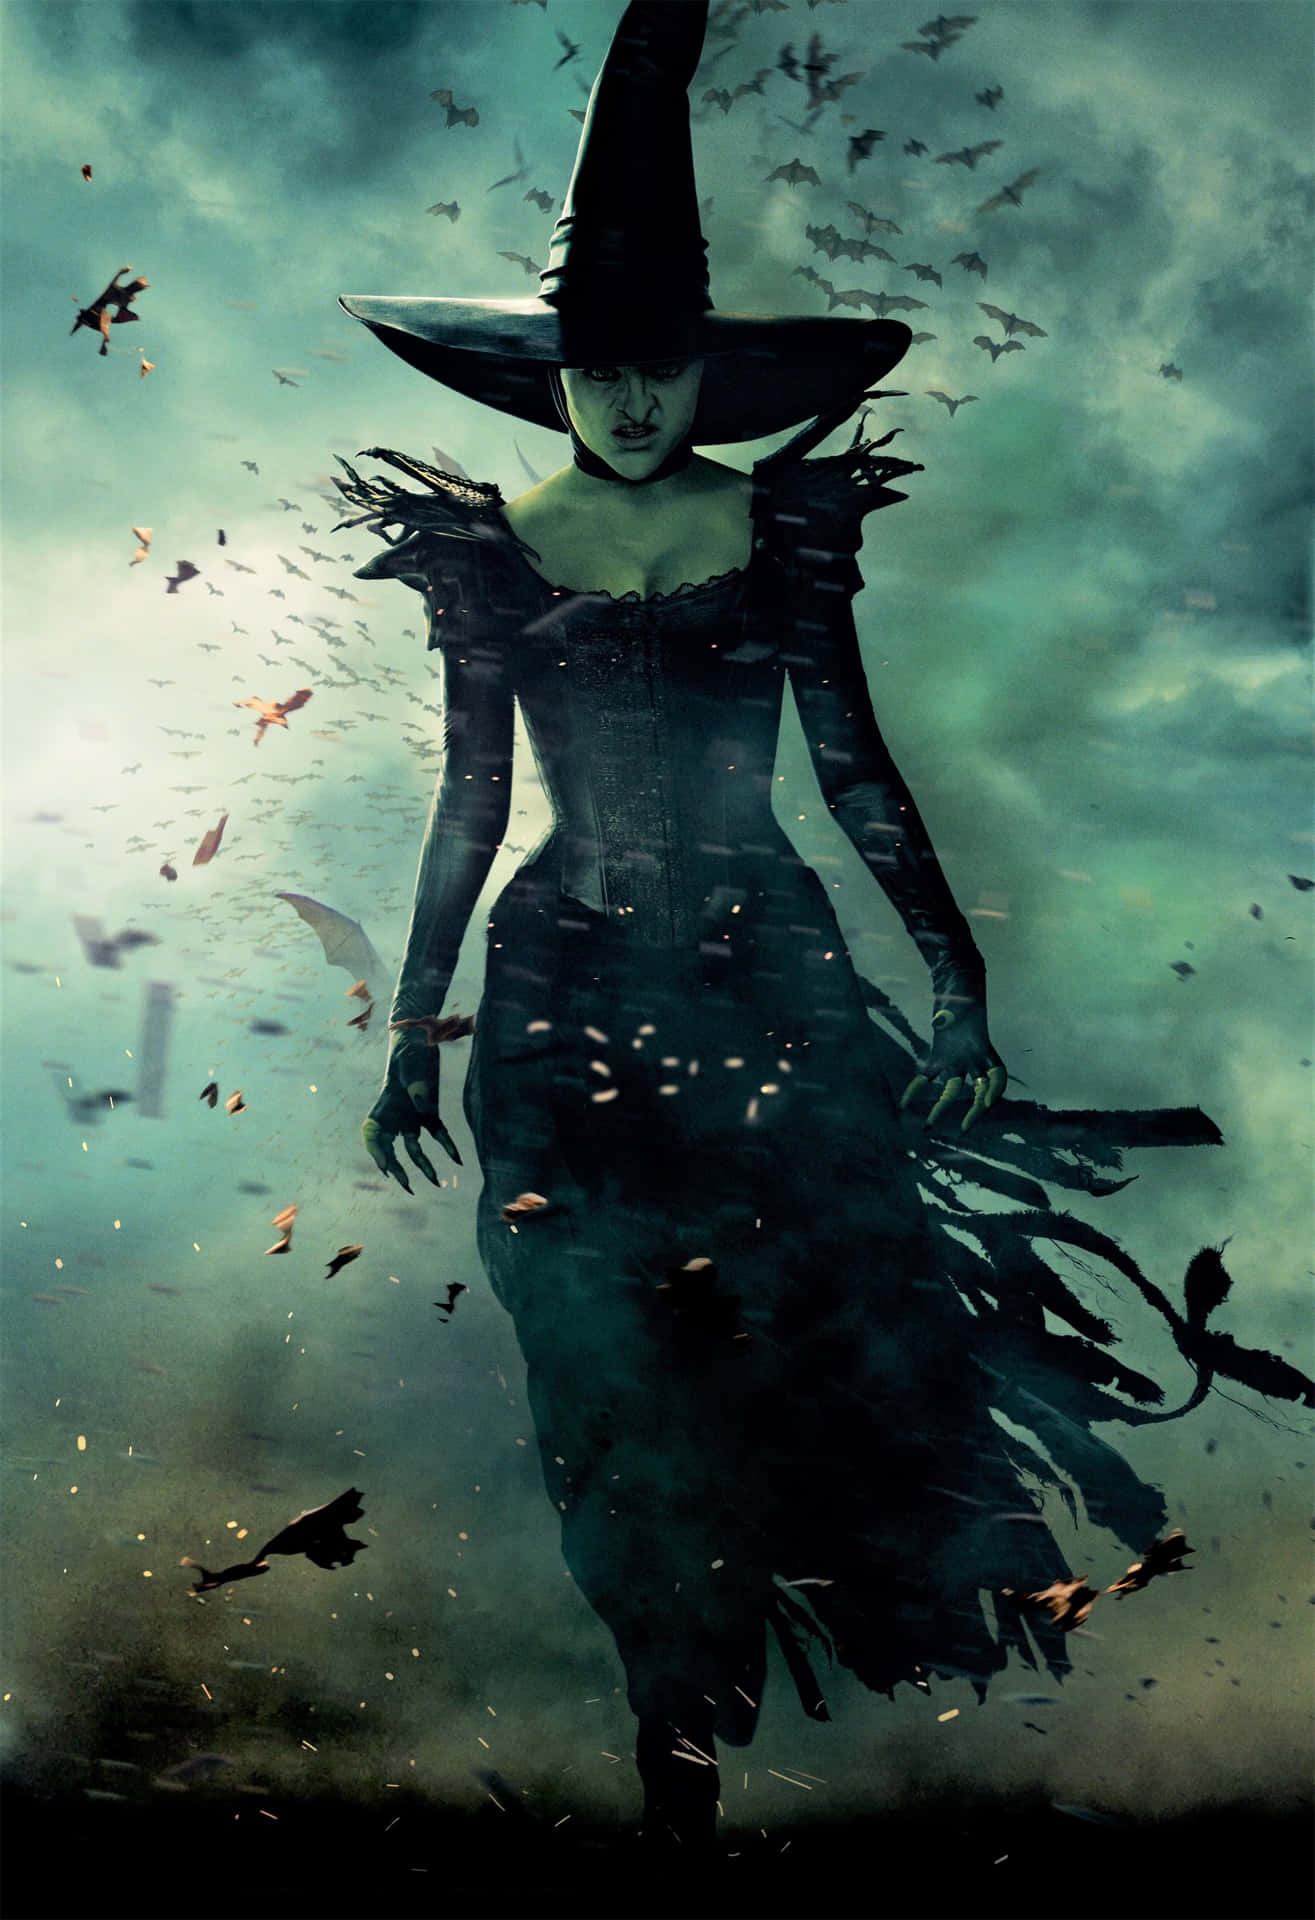 Mysterious Dark Witch on Full Moon Night Wallpaper